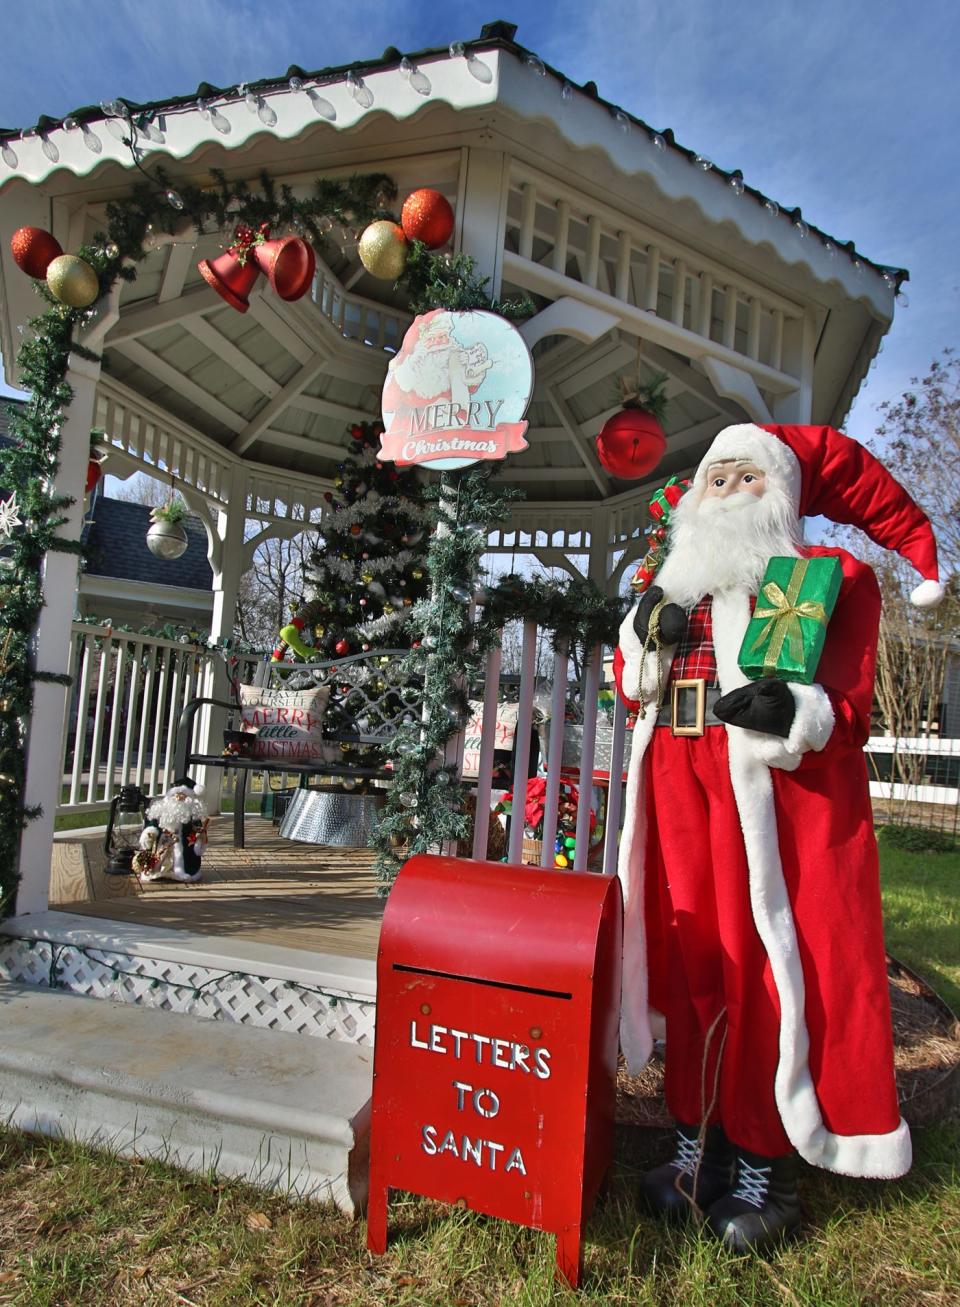 A decked out gazebo with Santa and a “Letters to Santa” mail box in the front yard of Donna Norman's home on Spencer Mountain Road in Ranlo where a special Christmas event was held Saturday afternoon, Dec. 19, 2020.